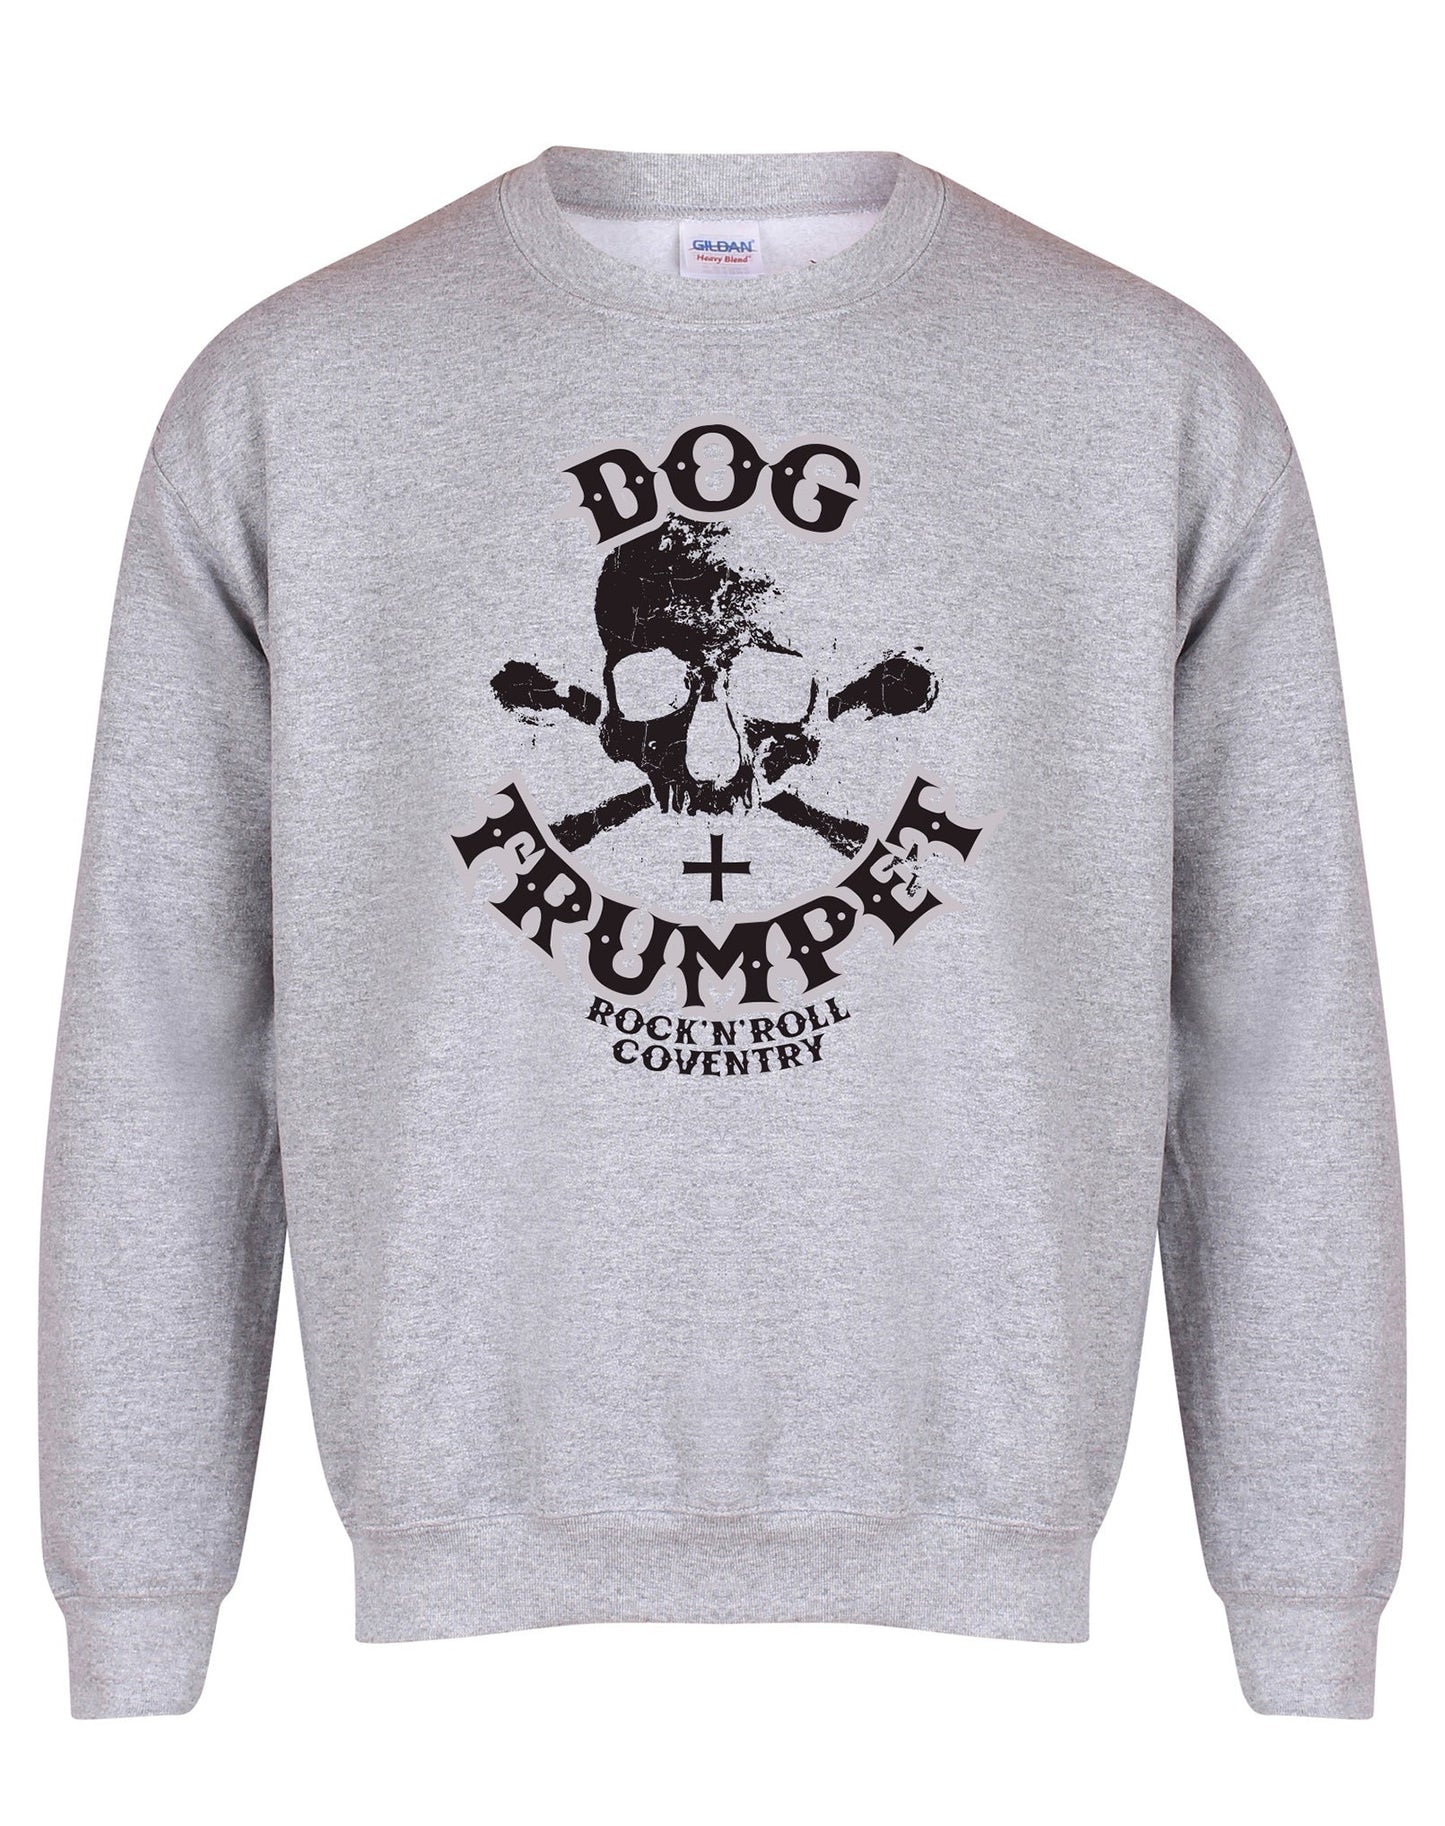 Dog & Trumpet (with skull) unisex fit sweatshirt - various colours - Dirty Stop Outs